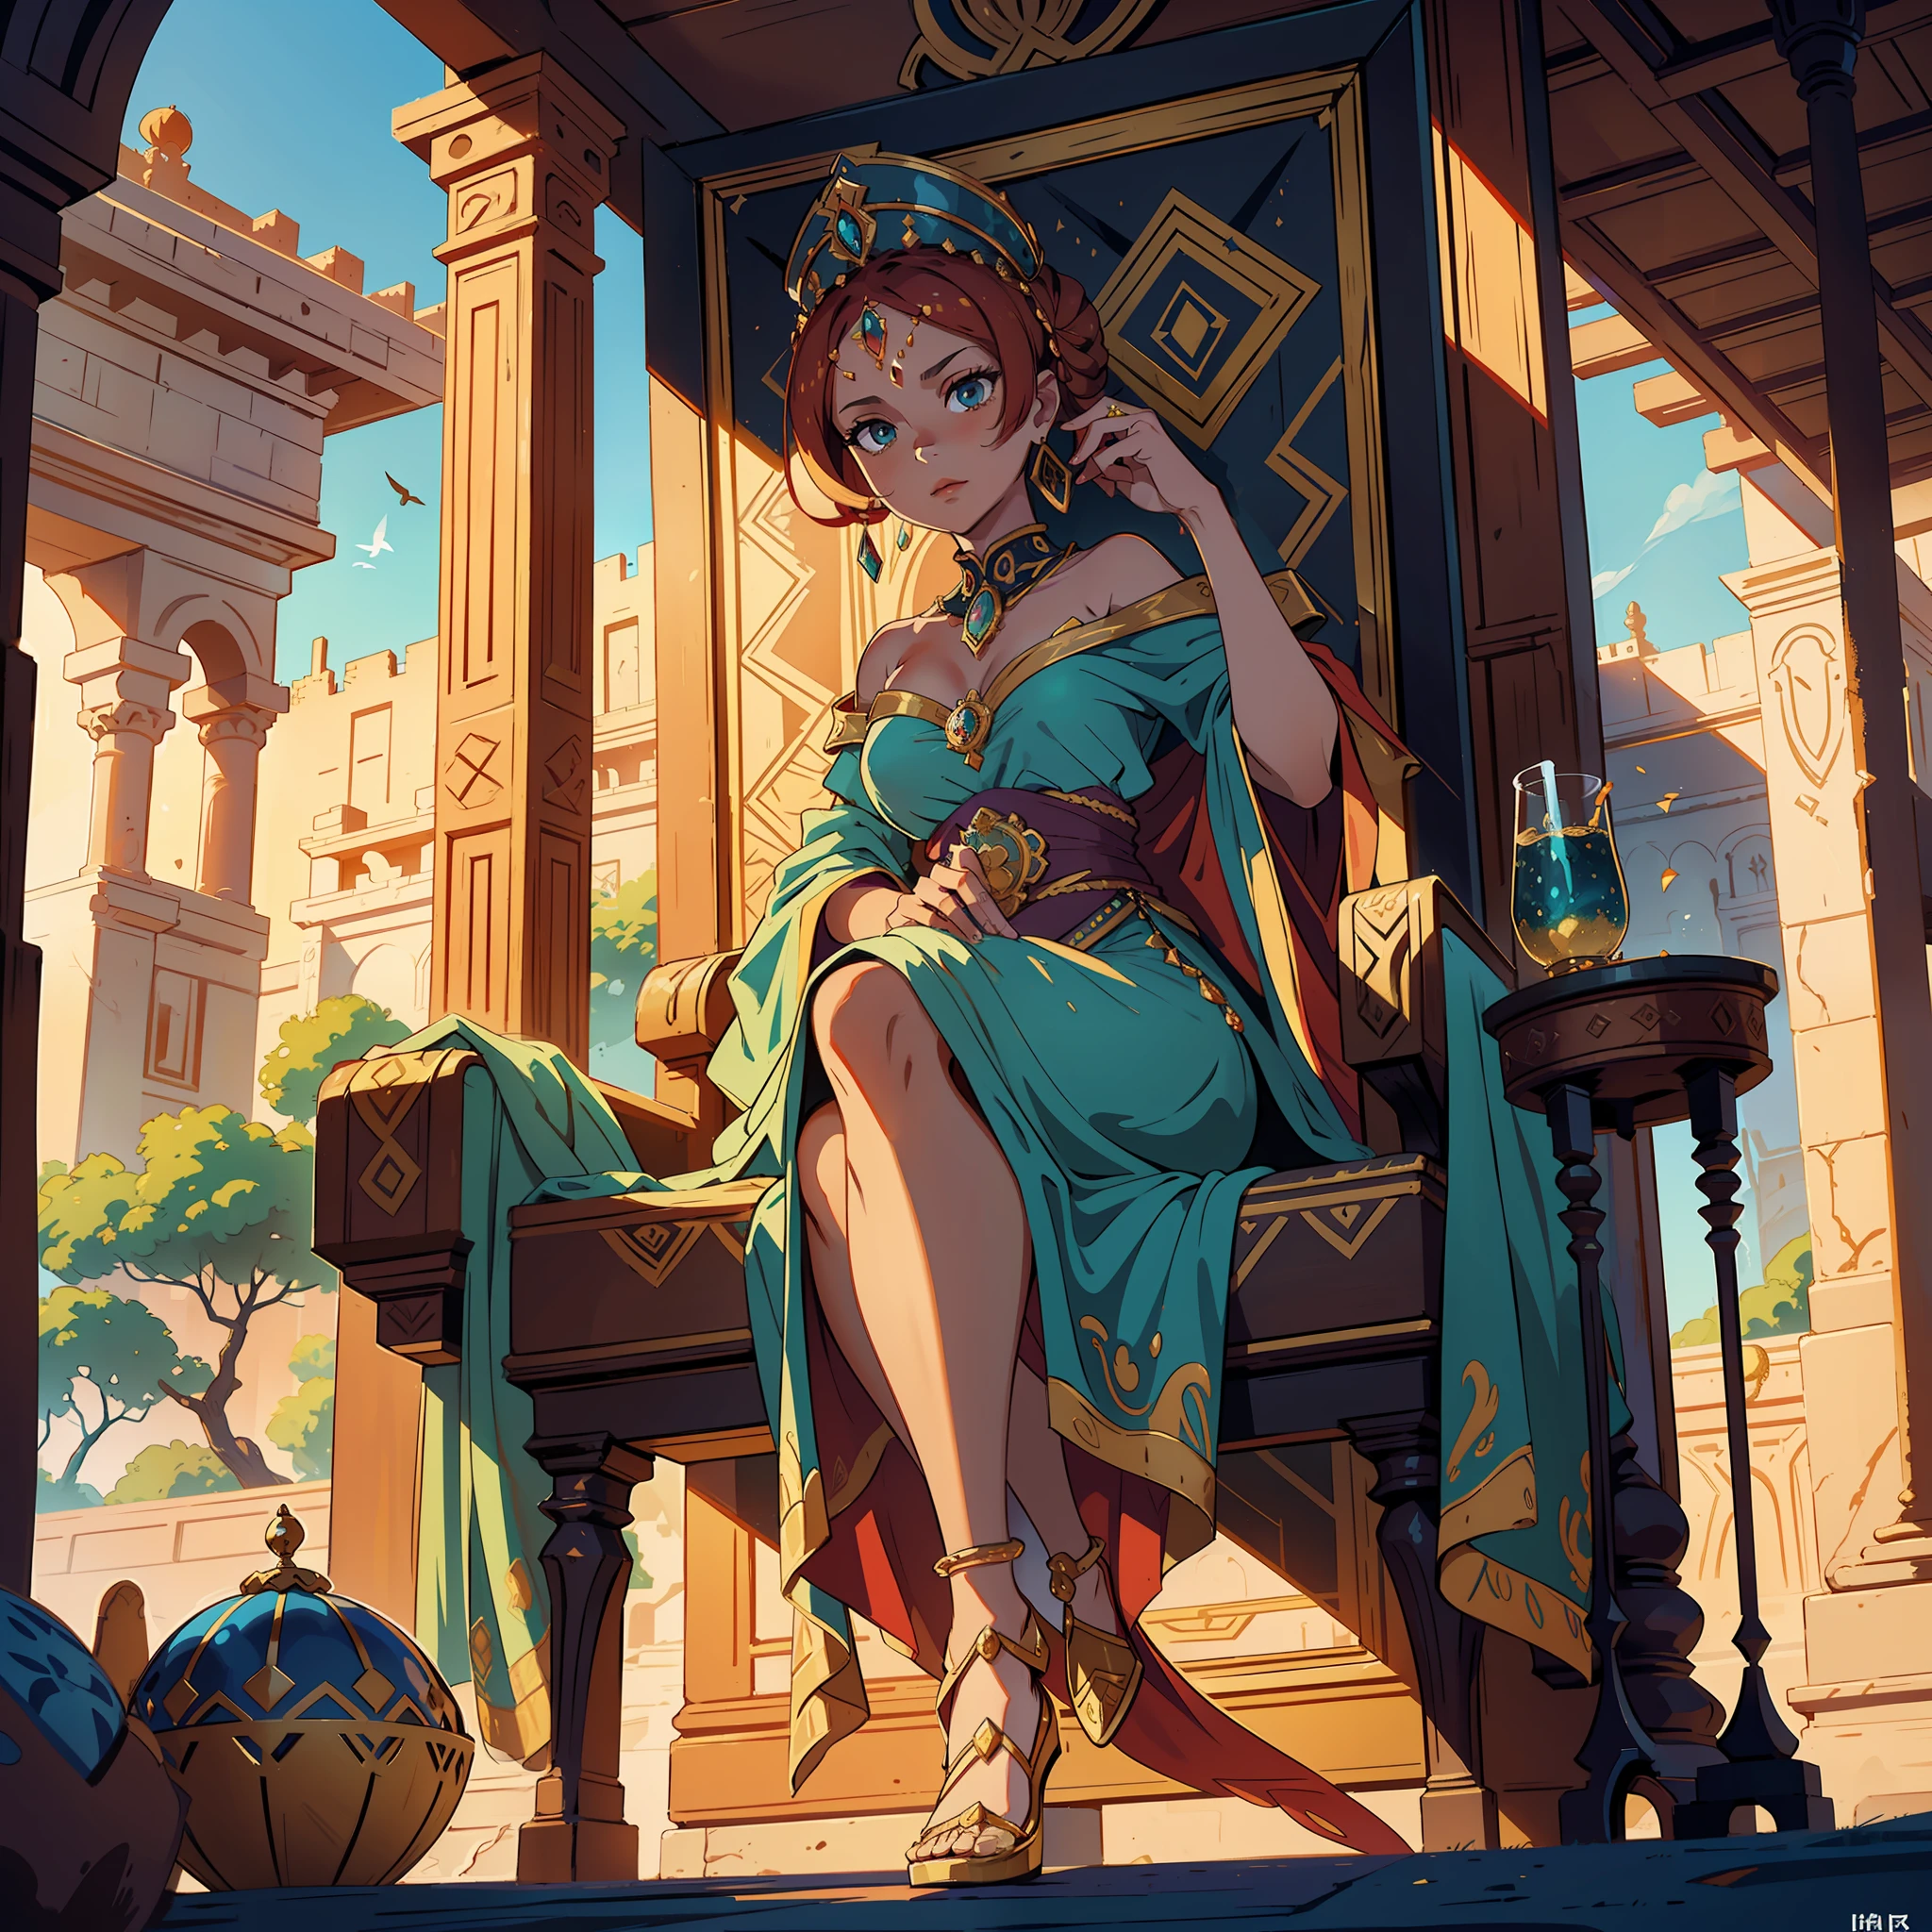 Step into a mesmerizing world of ancient splendor as you witness the grandeur of a Sub-Saharan Queen seated regally on her throne in a magnificent desert palace. This Leonardo.ai prompt offers a captivating cinematic low-angle shot, immersing you in the opulence and power of a powerful monarch ruling over a vast and arid kingdom.